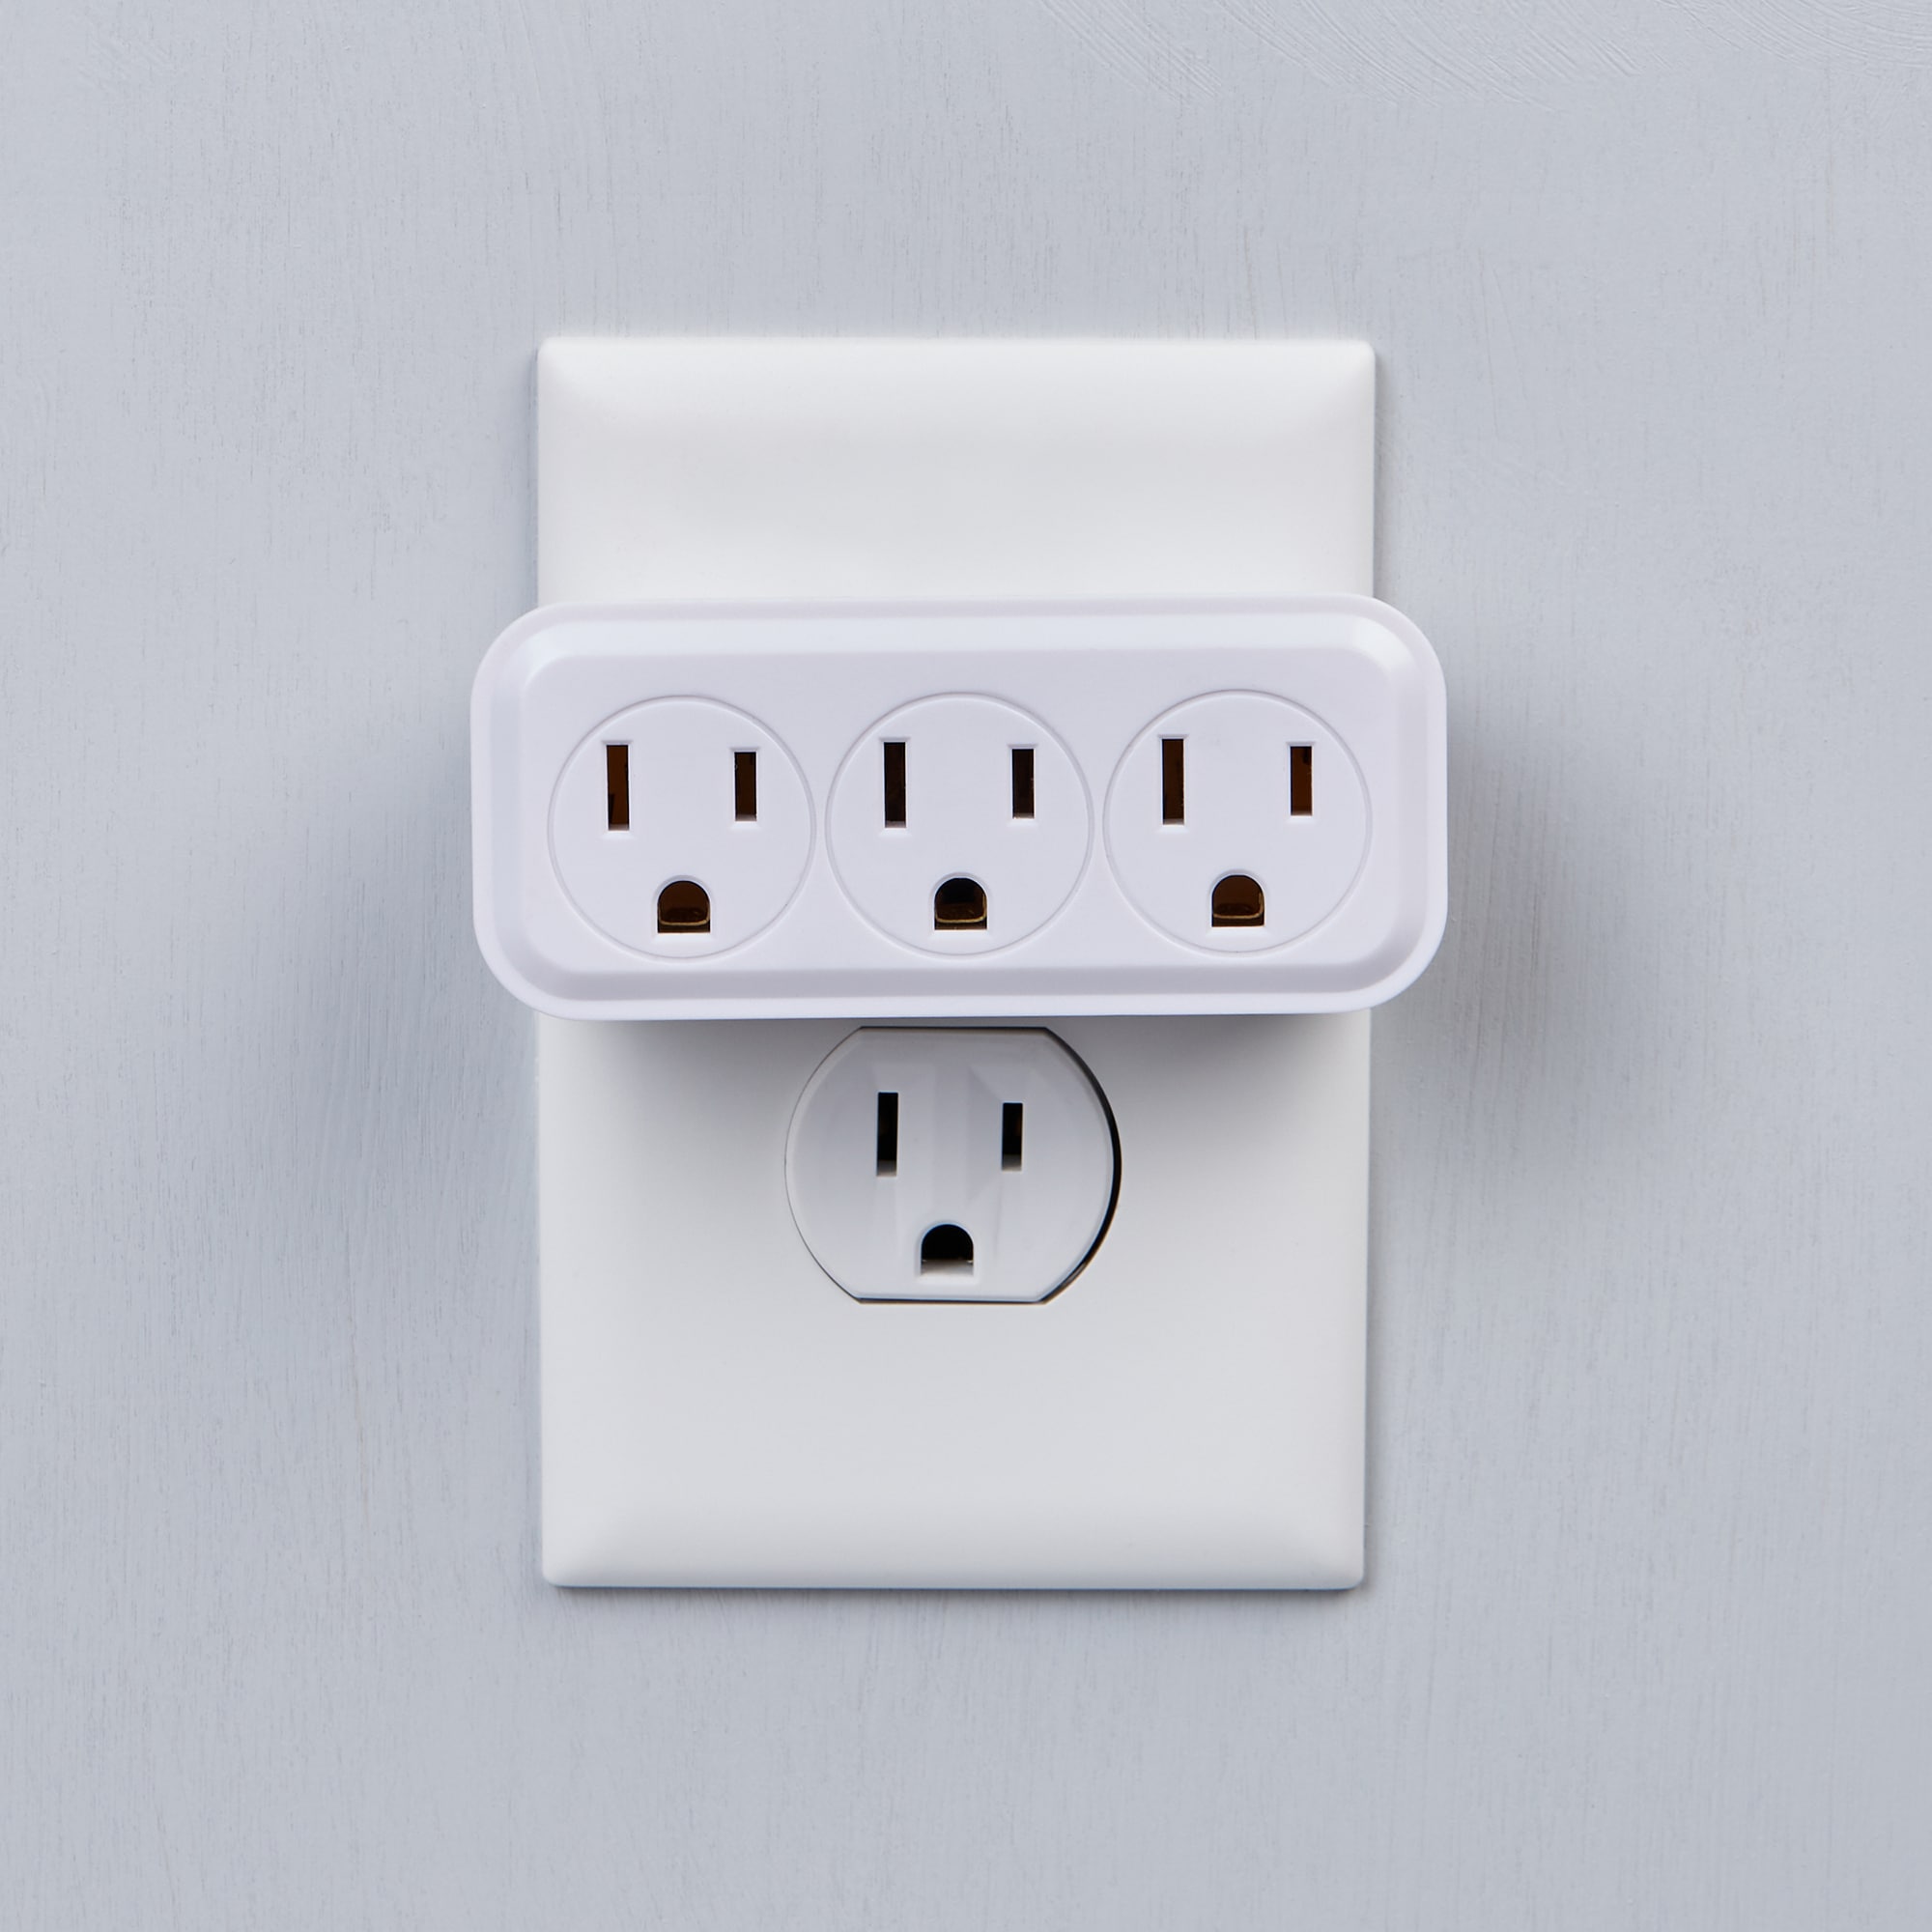 UOUO 15A AIR COND. SWITCH SOCKET OUTLET - WHITE